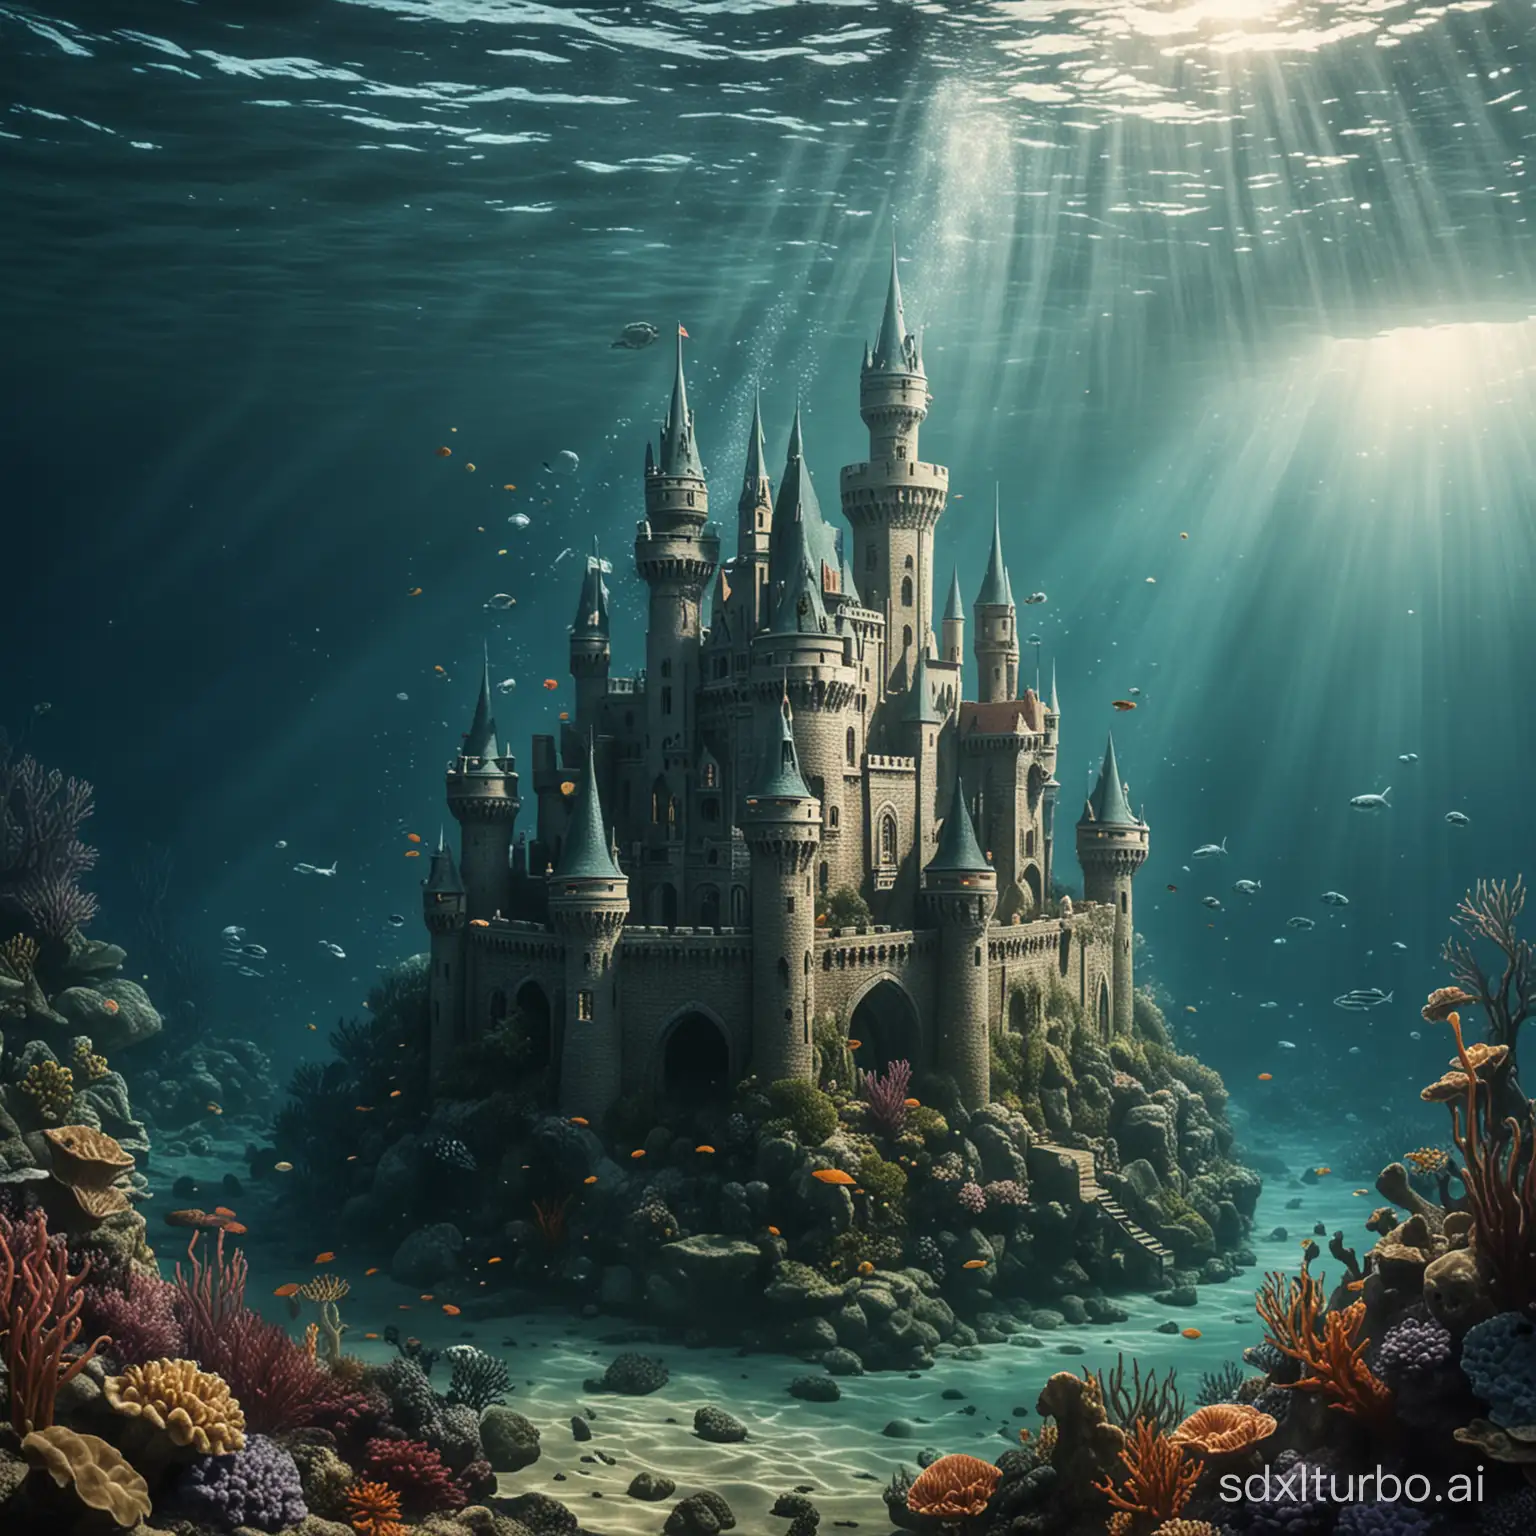 The castle is under the sea